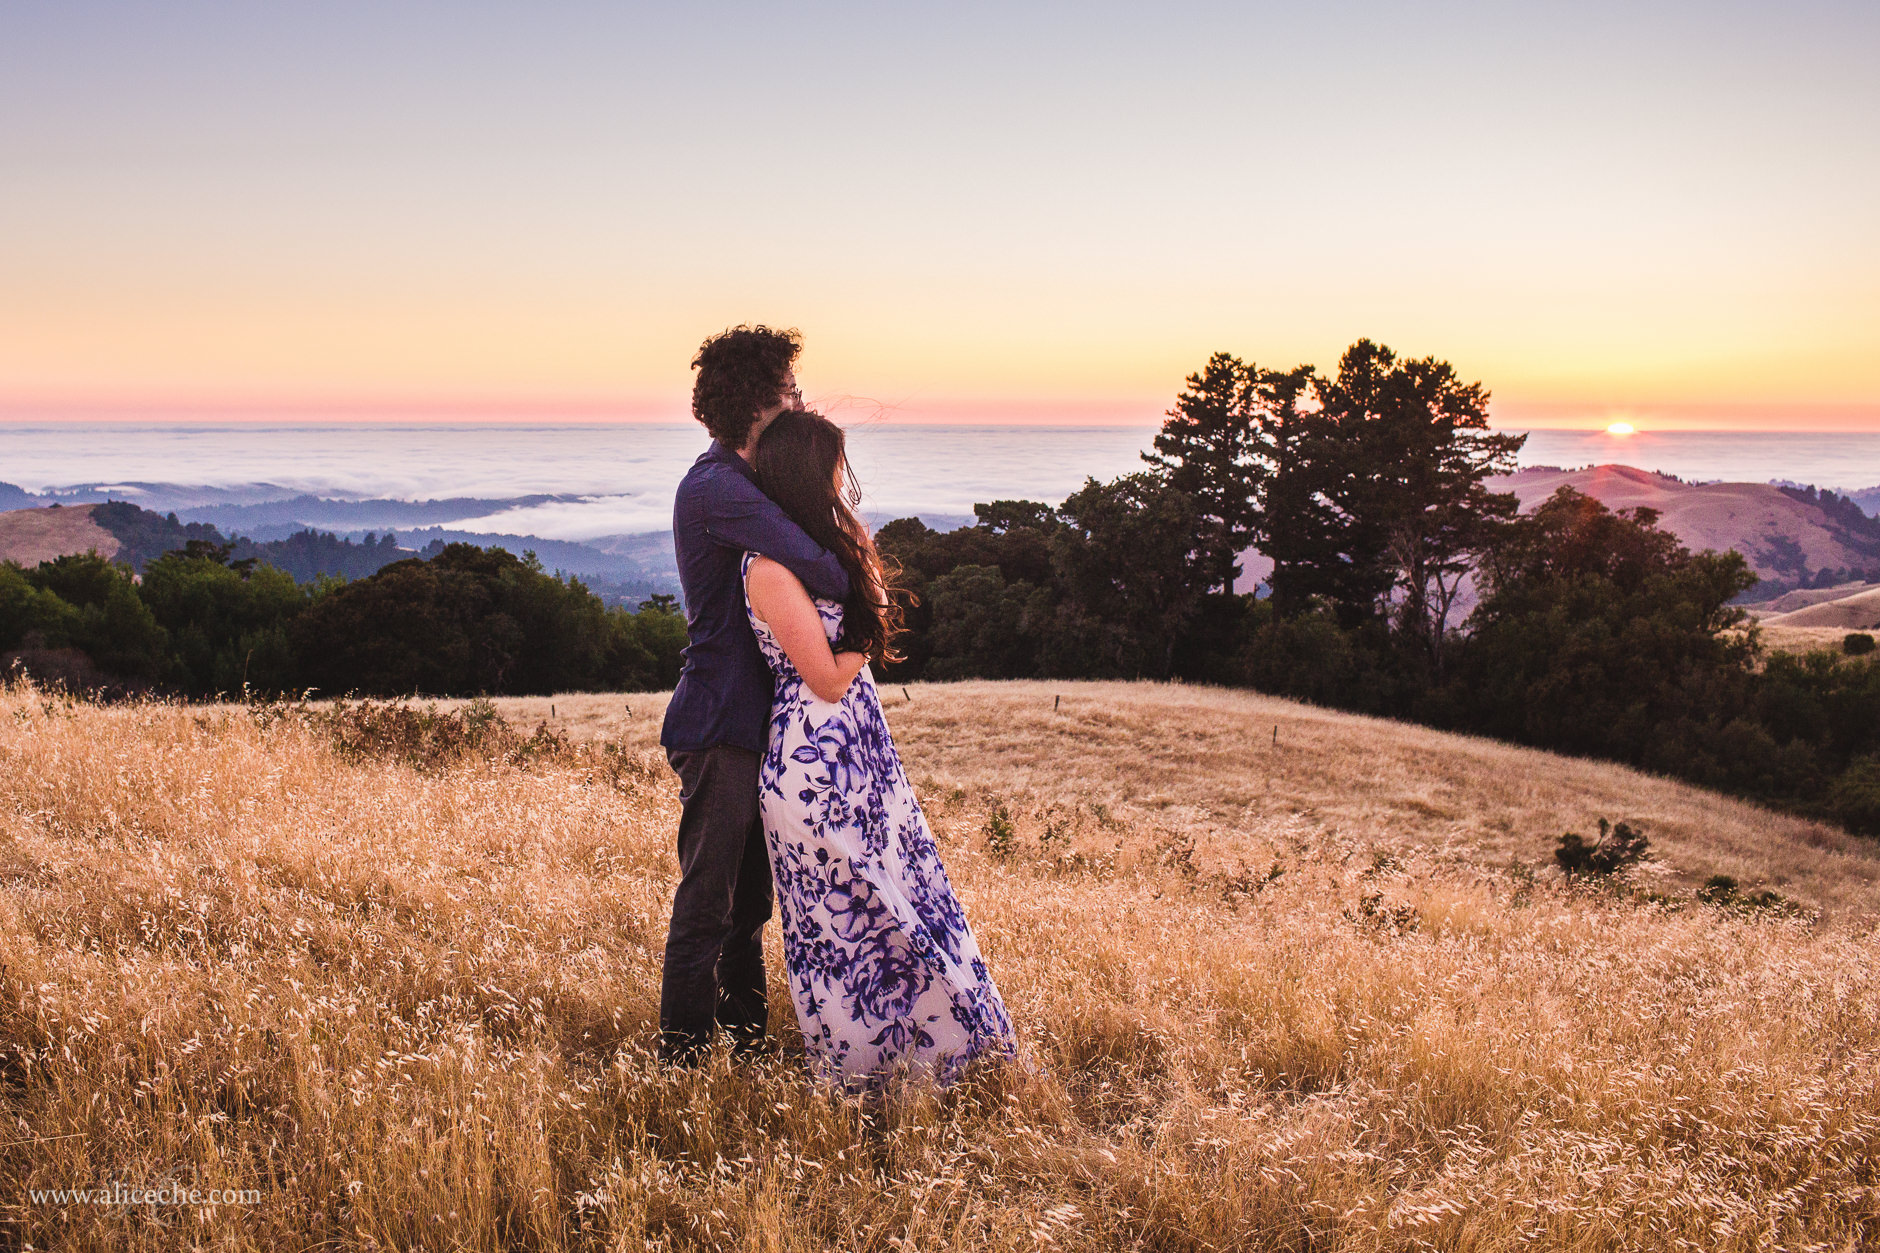 Russian Ridge Couples Session Couple Watching the Fog Roll In at Sunset Bay Area Wedding Photographer